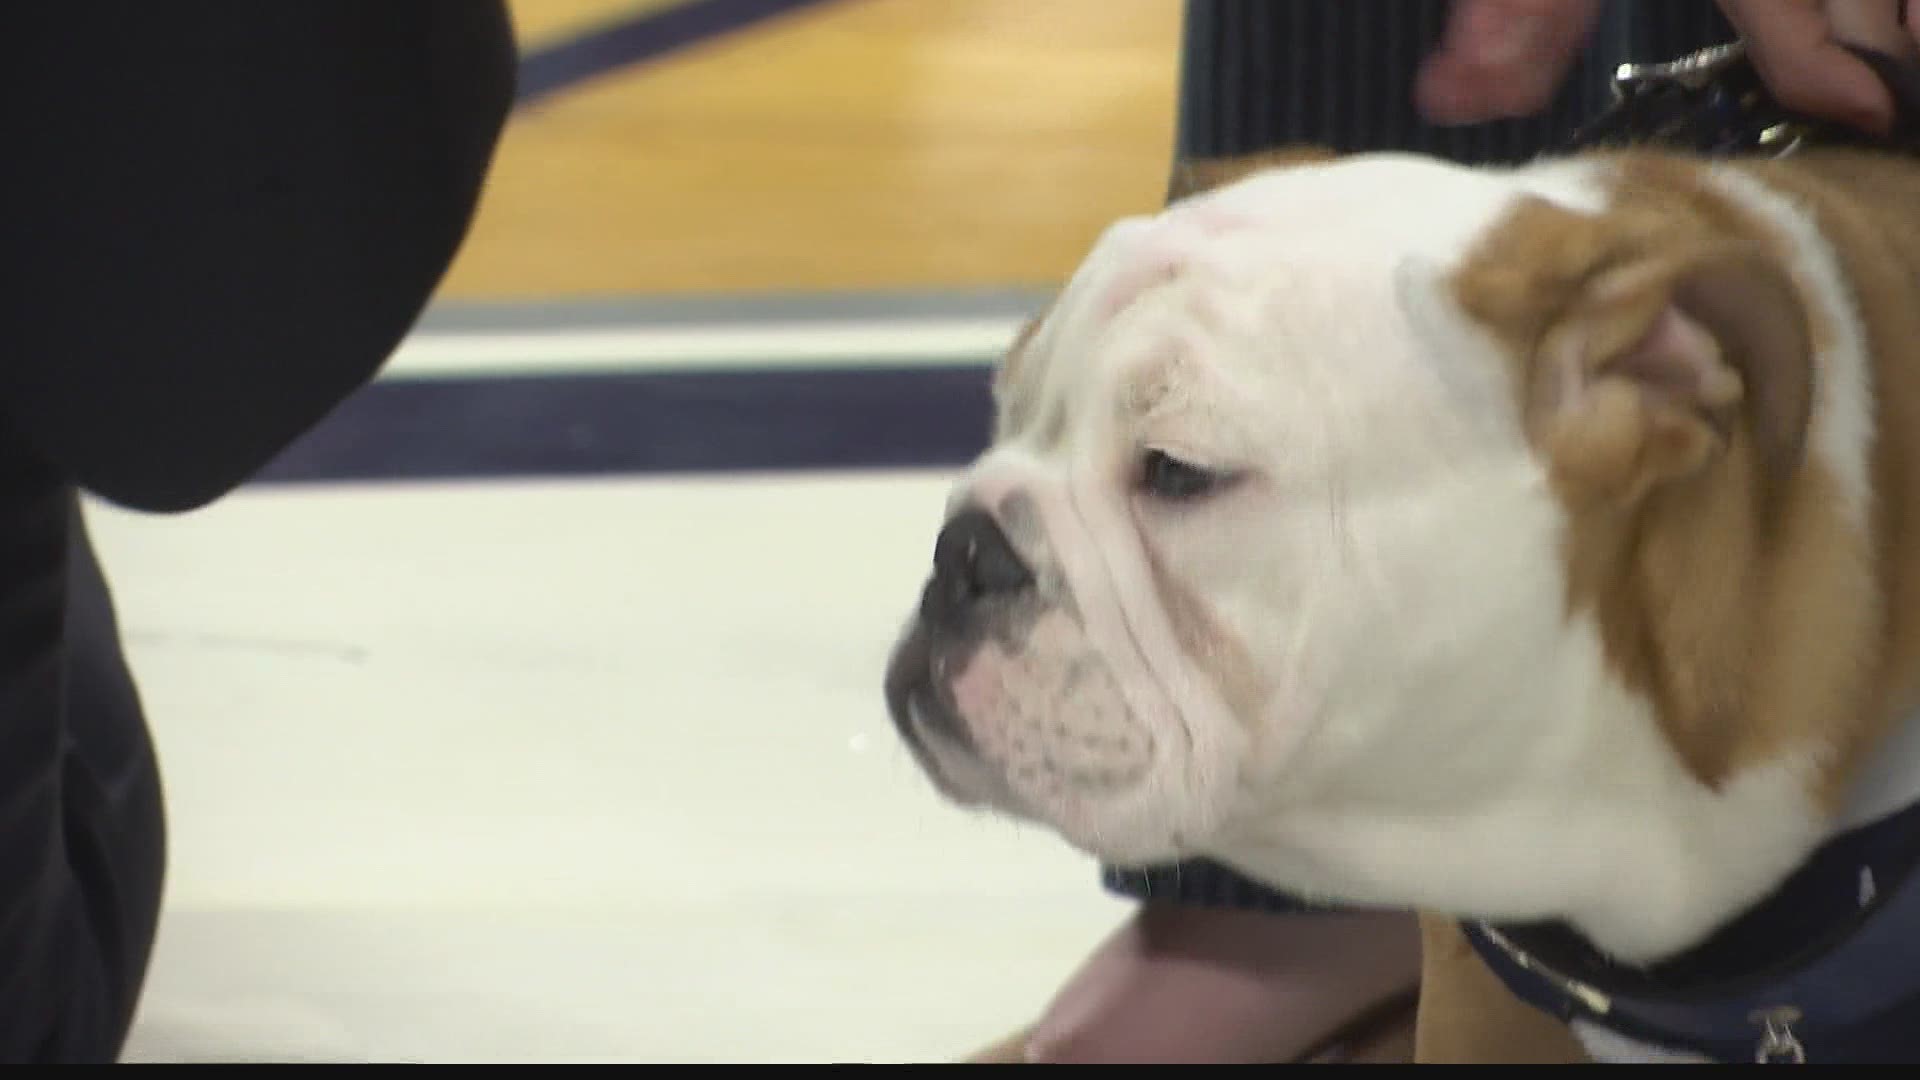 The new season of "Dogs" premieres on July 7th and there will be an entire hour-long episode dedicated to the changing of the collar when Butler Blue III retired.